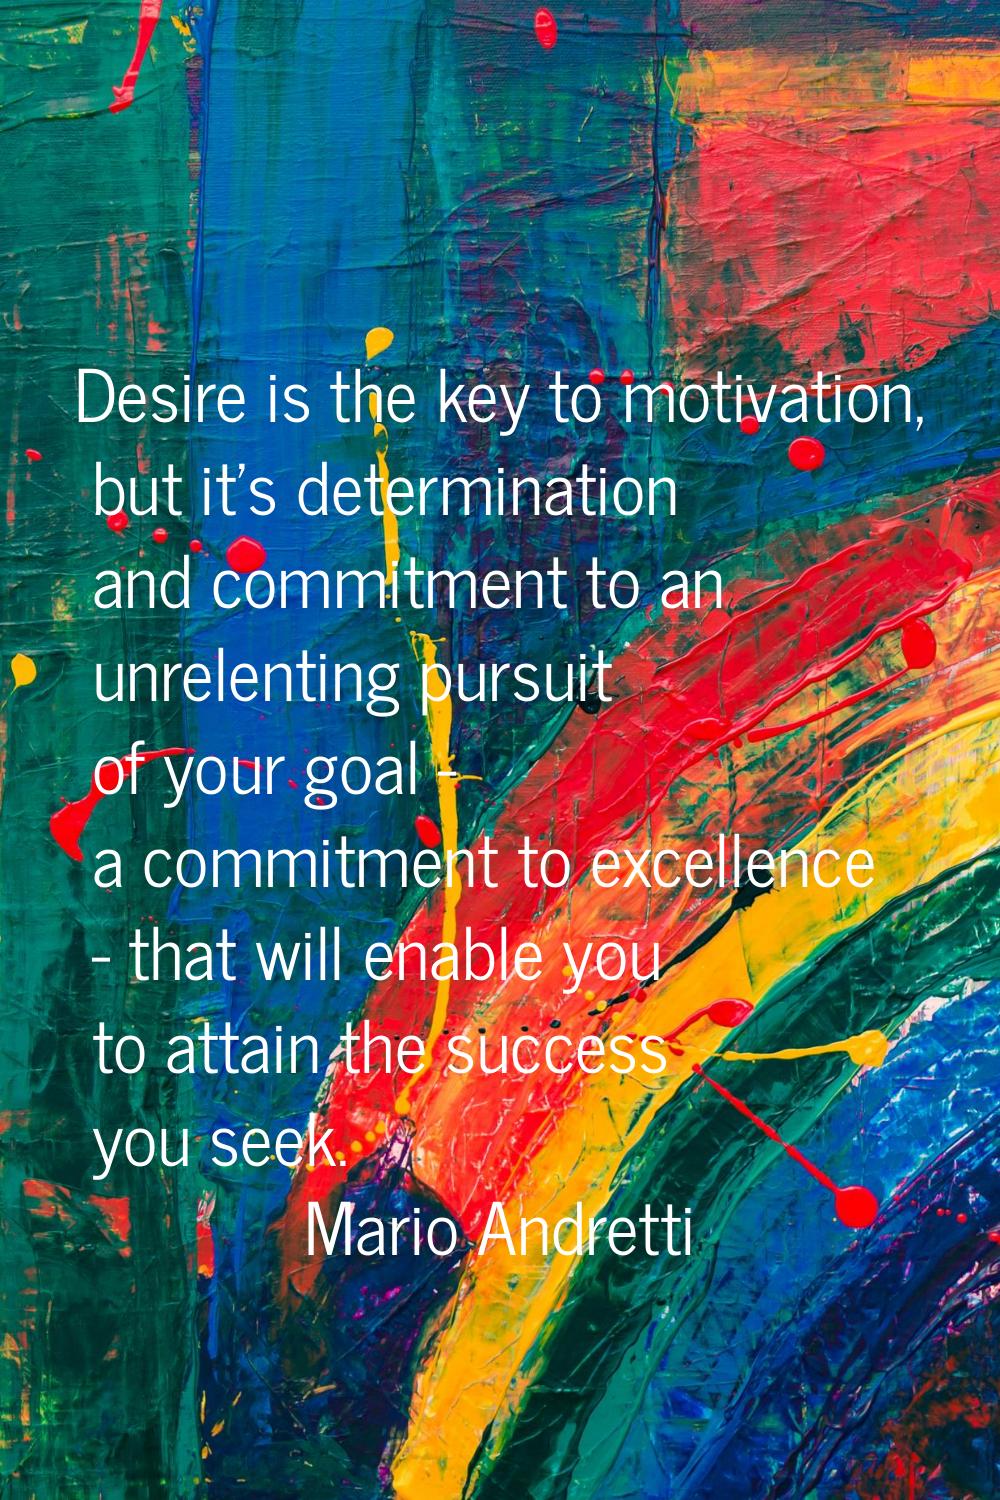 Desire is the key to motivation, but it's determination and commitment to an unrelenting pursuit of